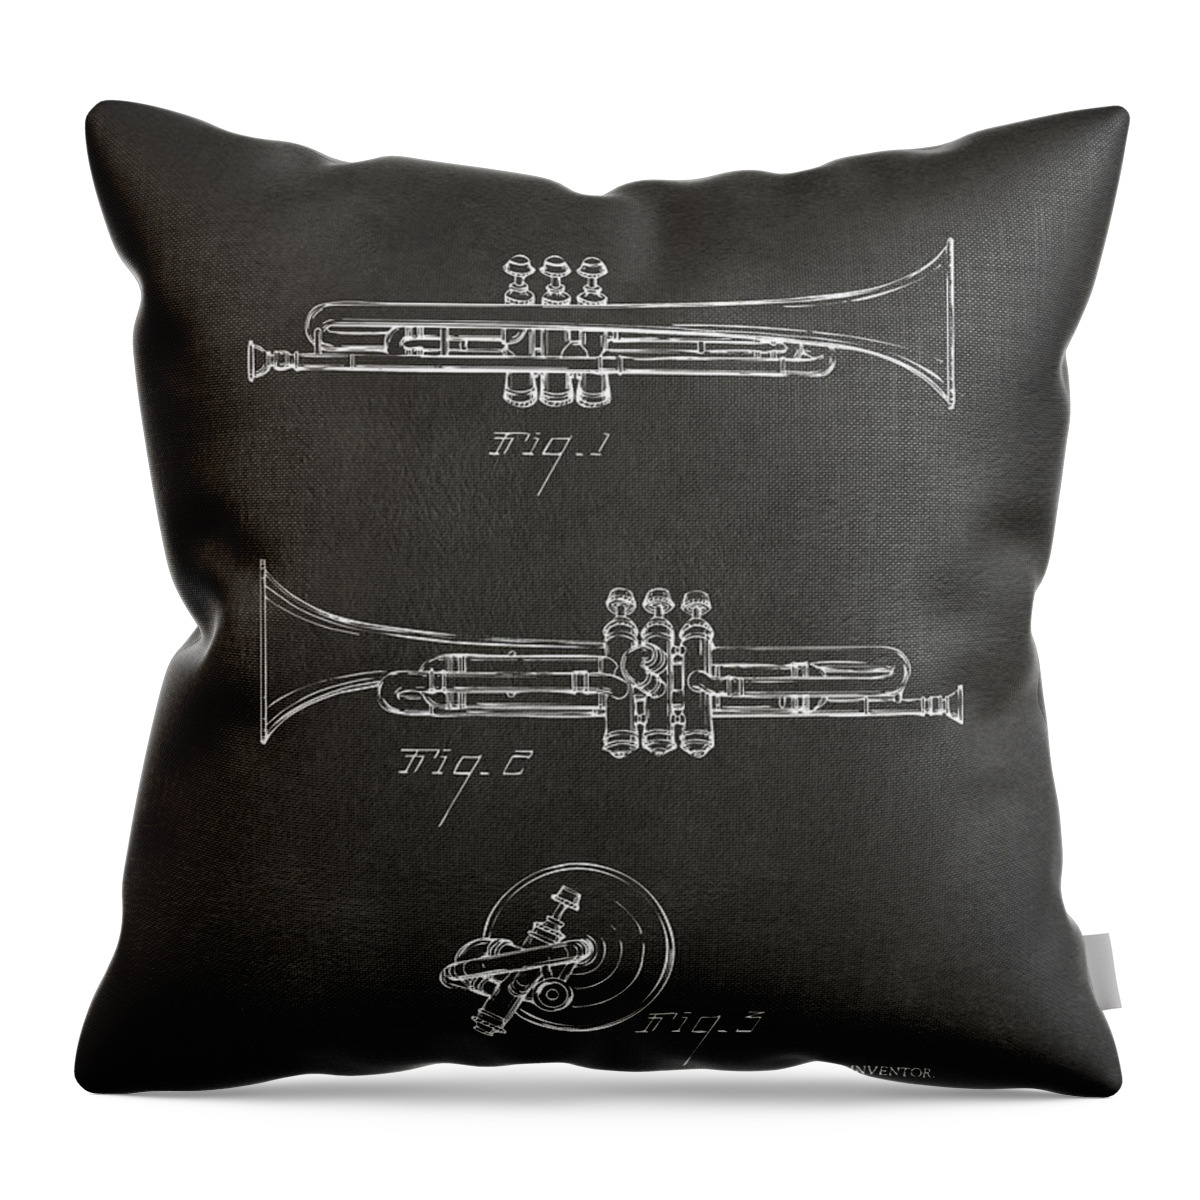 Trumpet Throw Pillow featuring the digital art 1940 Trumpet Patent Artwork - Gray by Nikki Marie Smith